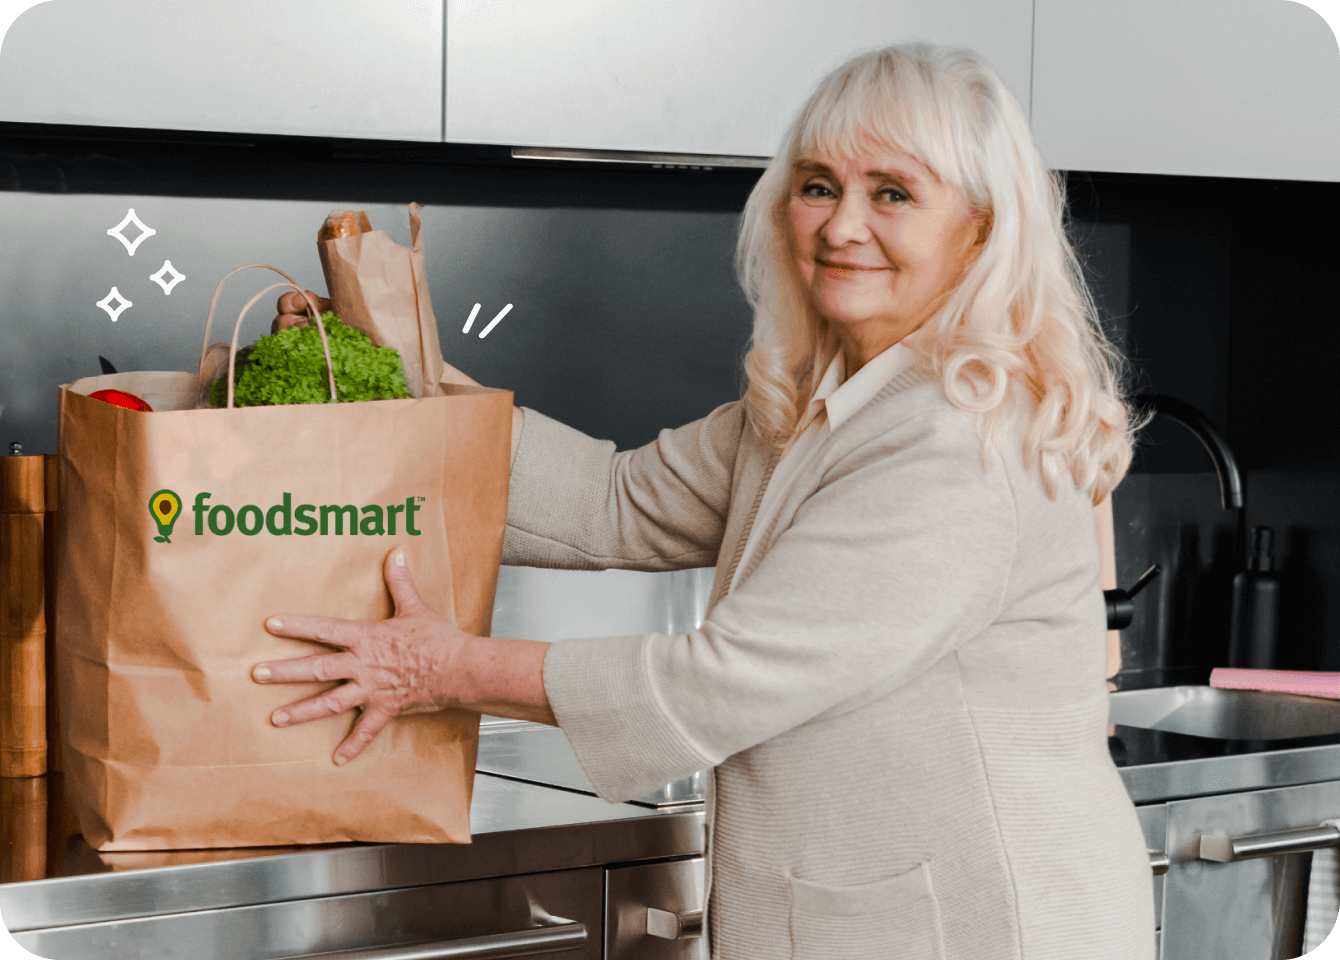 Photo of an older lady happily setting a bag of Foodsmart groceries on her counter